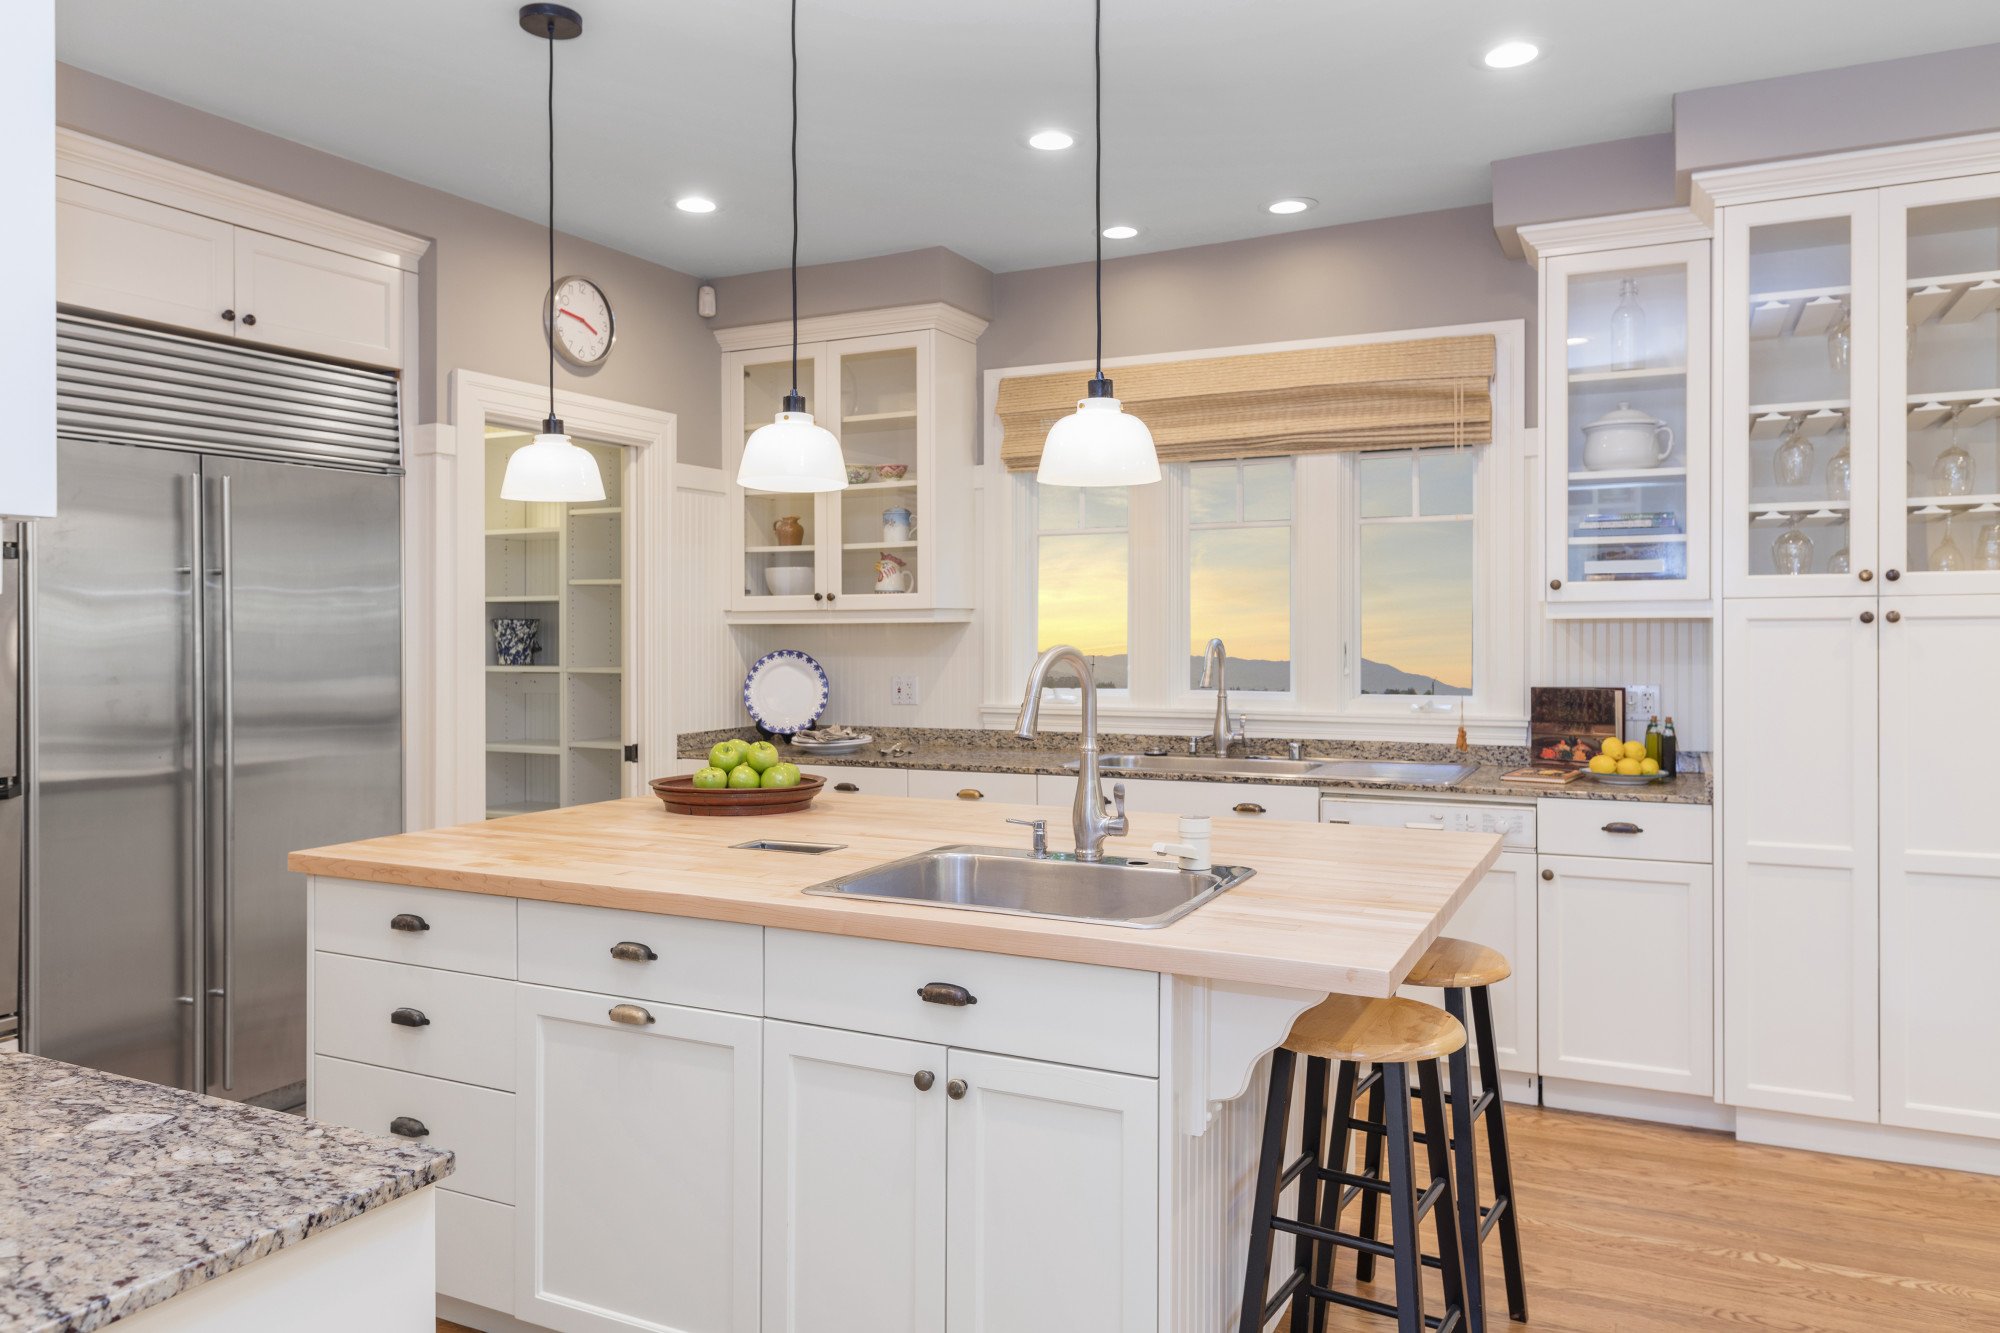 Did you know a kitchen renovation can increase the value of your home greatly? Luxury kitchen cabinets play a large role - learn the facts now.